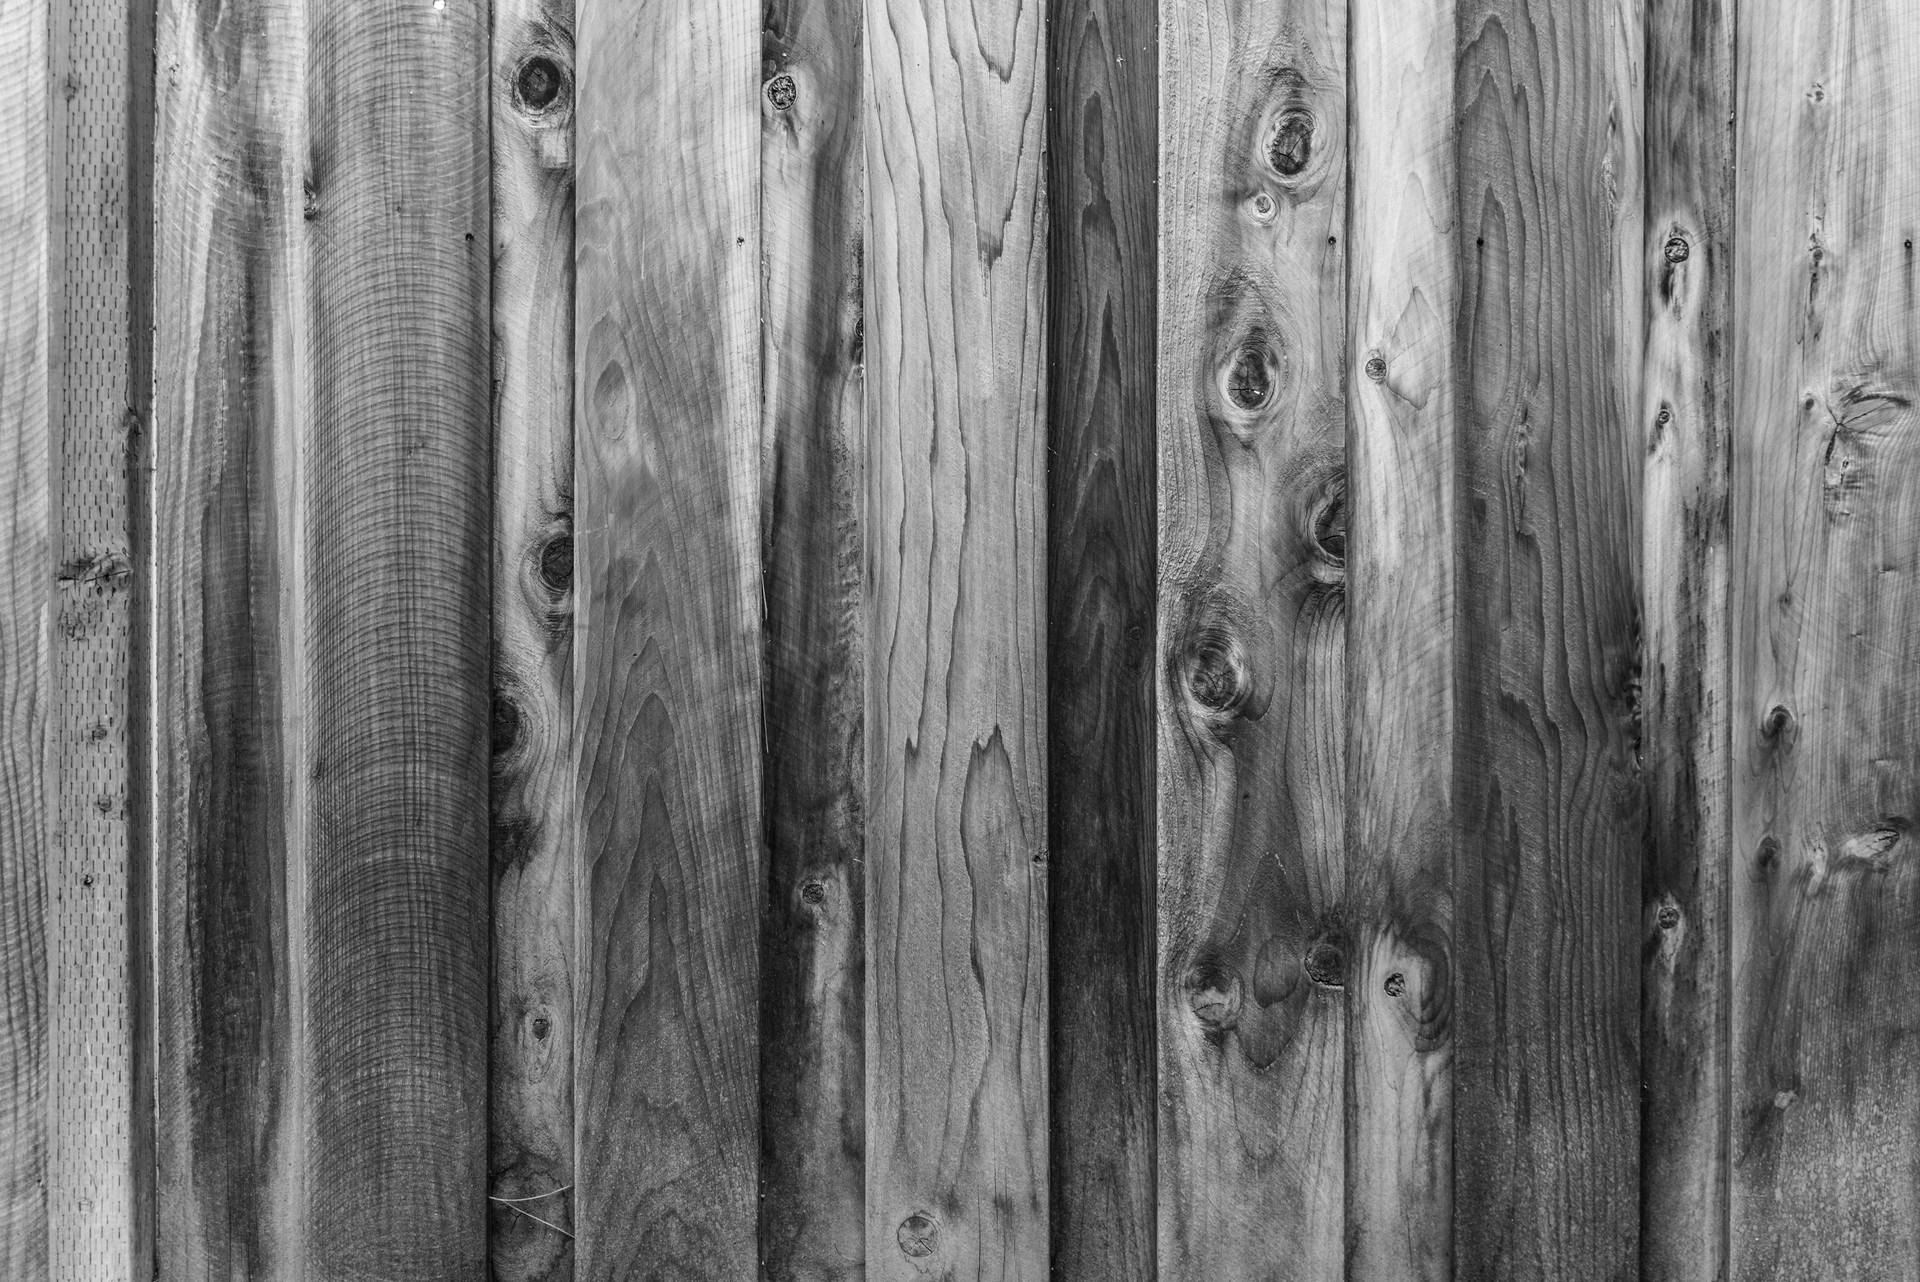 6016X4016 Wood Wallpaper and Background